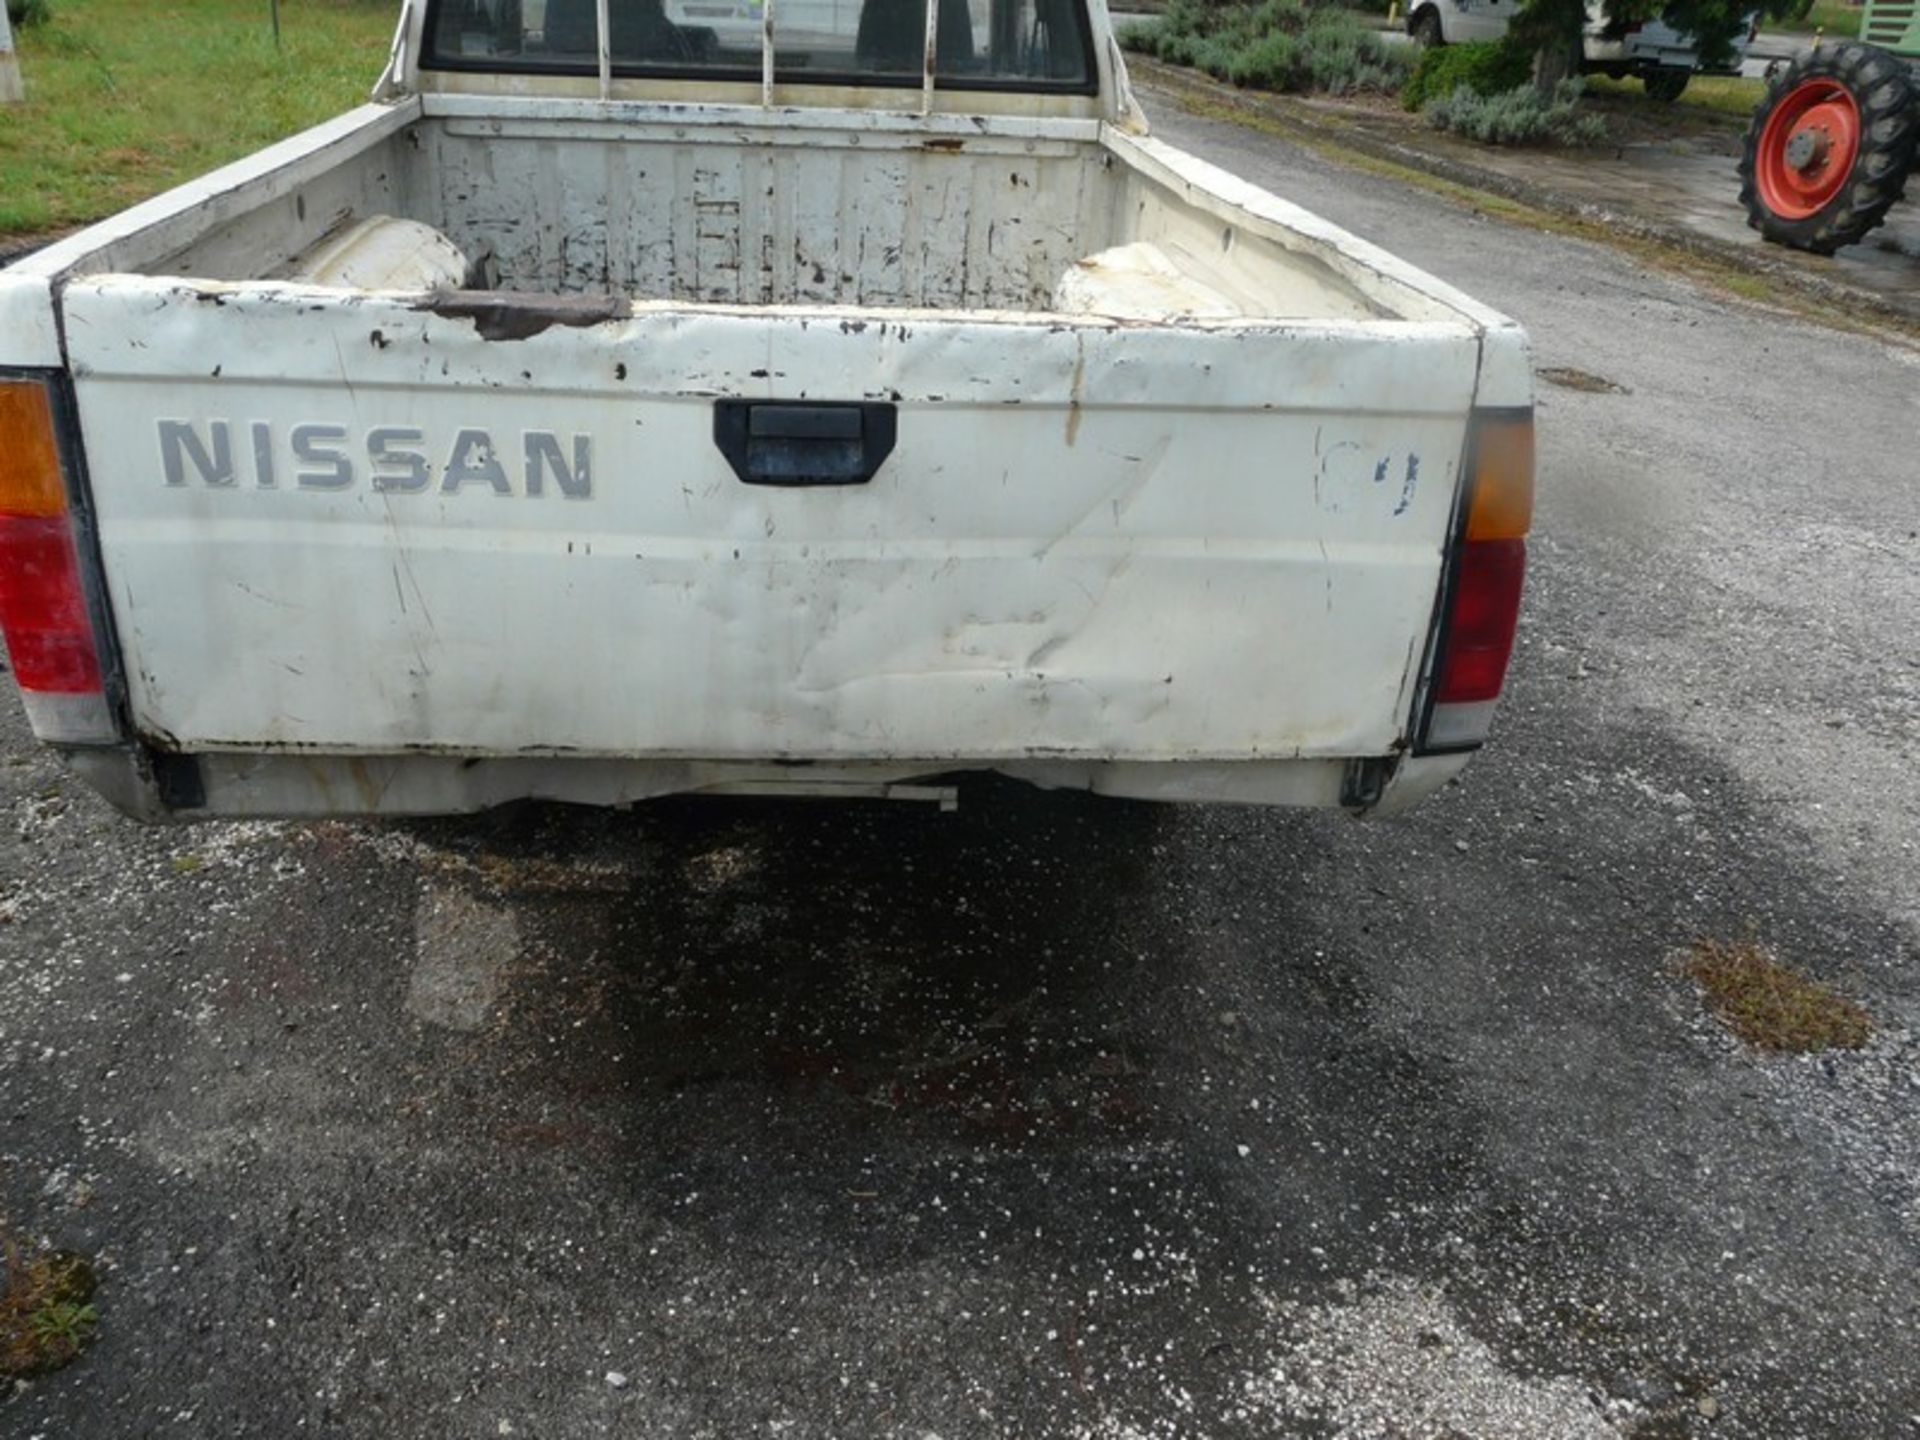 NISSAN KING CAB , REG: NBK 3437,PICK UP, PETROL ,KM 354381, WORKING CONDITION , MISSING BATTERY ( - Image 7 of 11